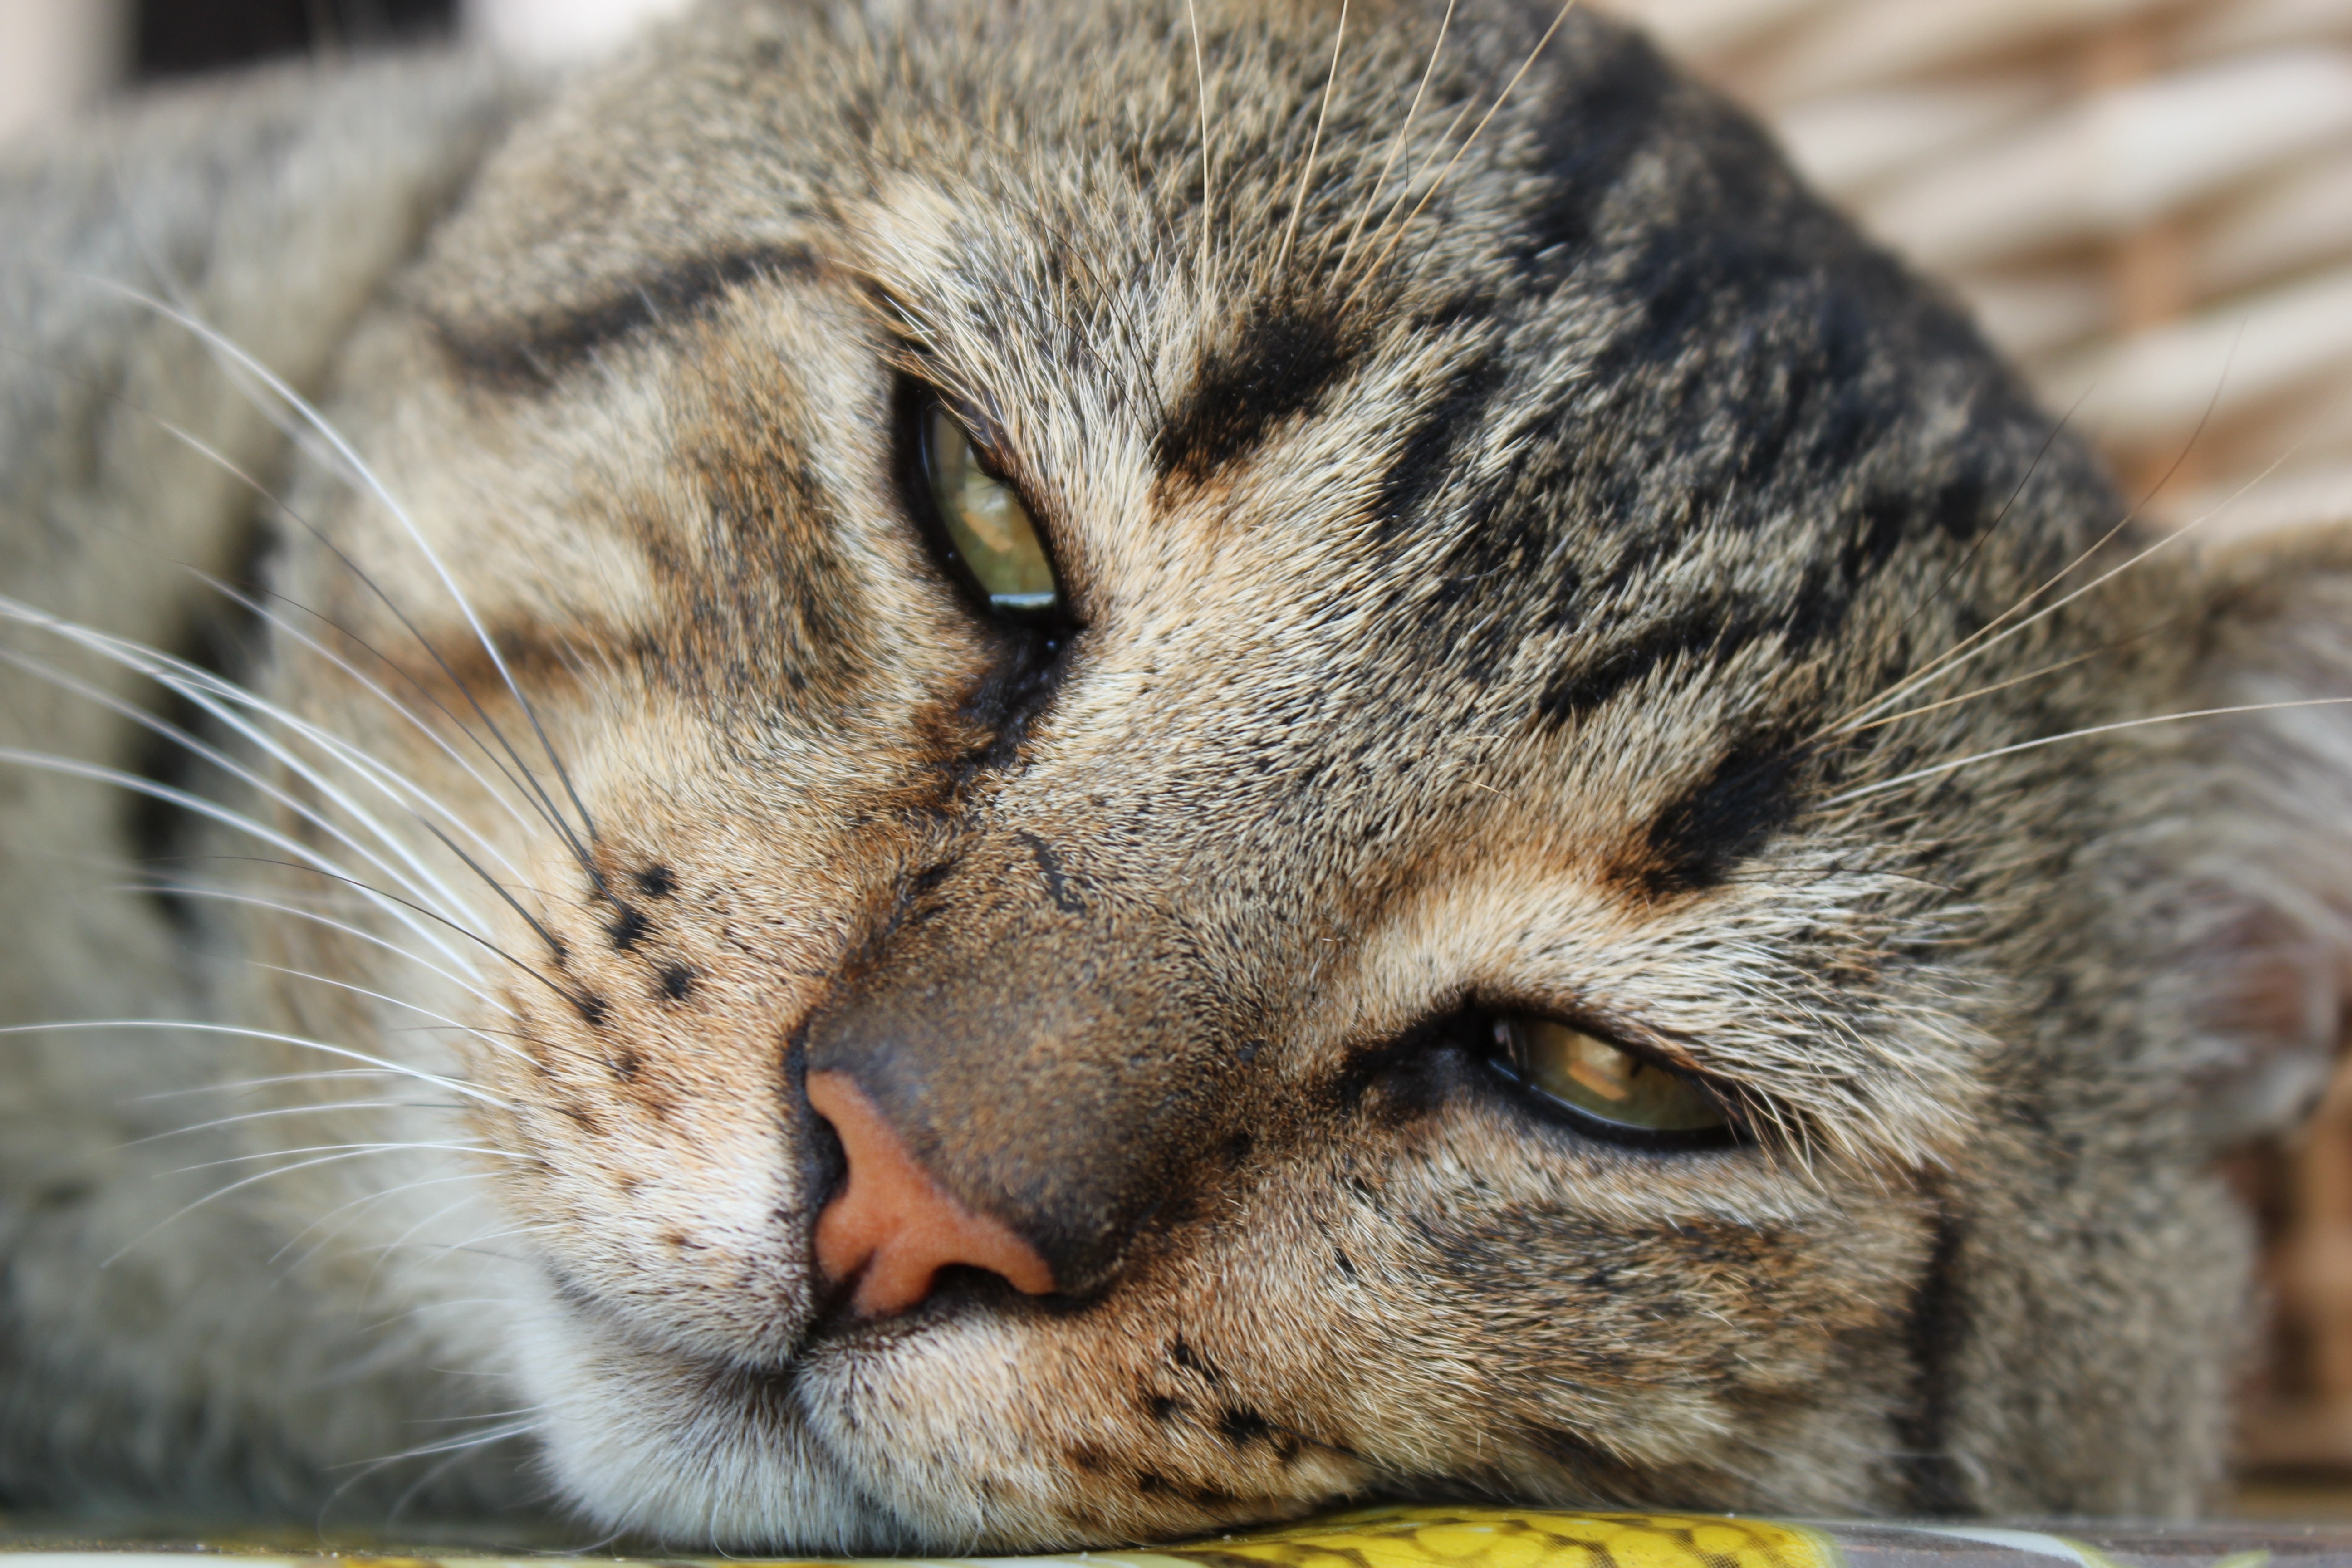 Cat, Face, Animal, Tired, Rest, Pet, one animal, domestic cat